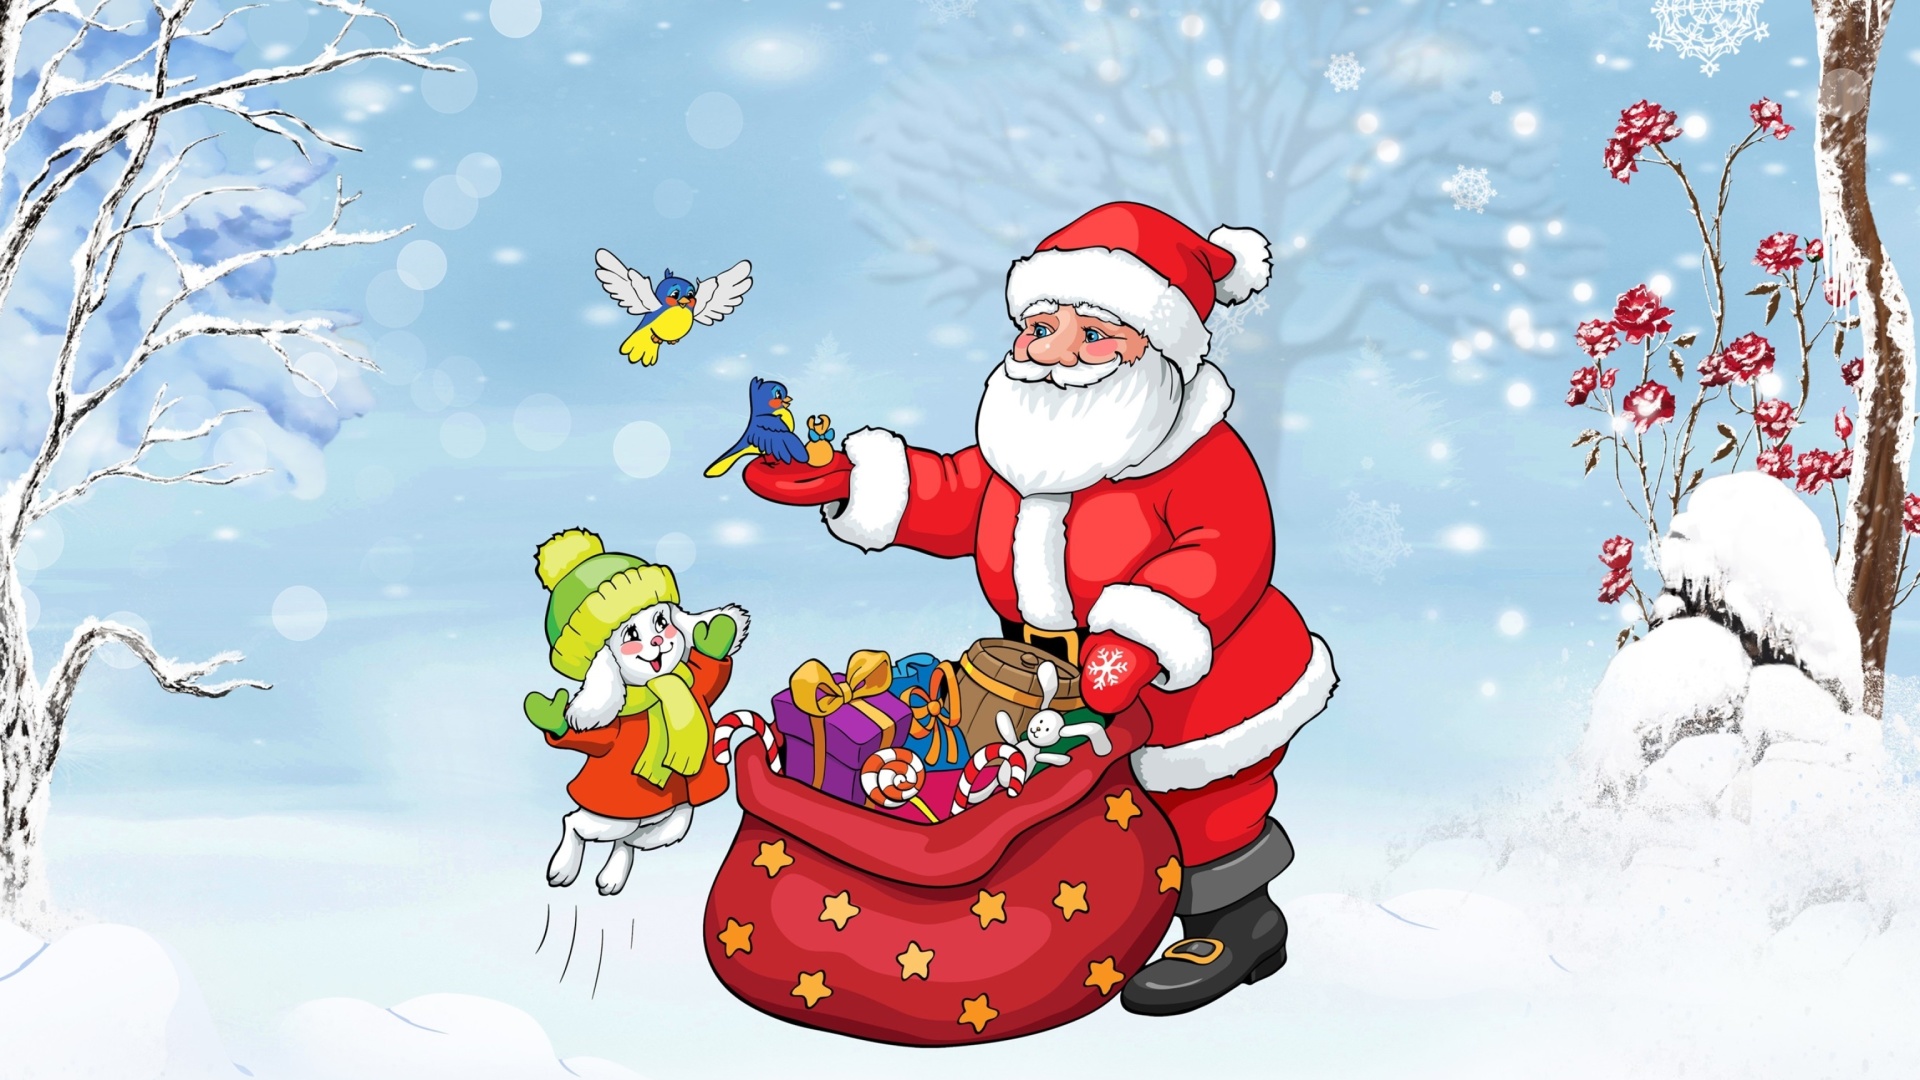 Santa Claus And The Christmas Adventure wallpaper 1920x1080